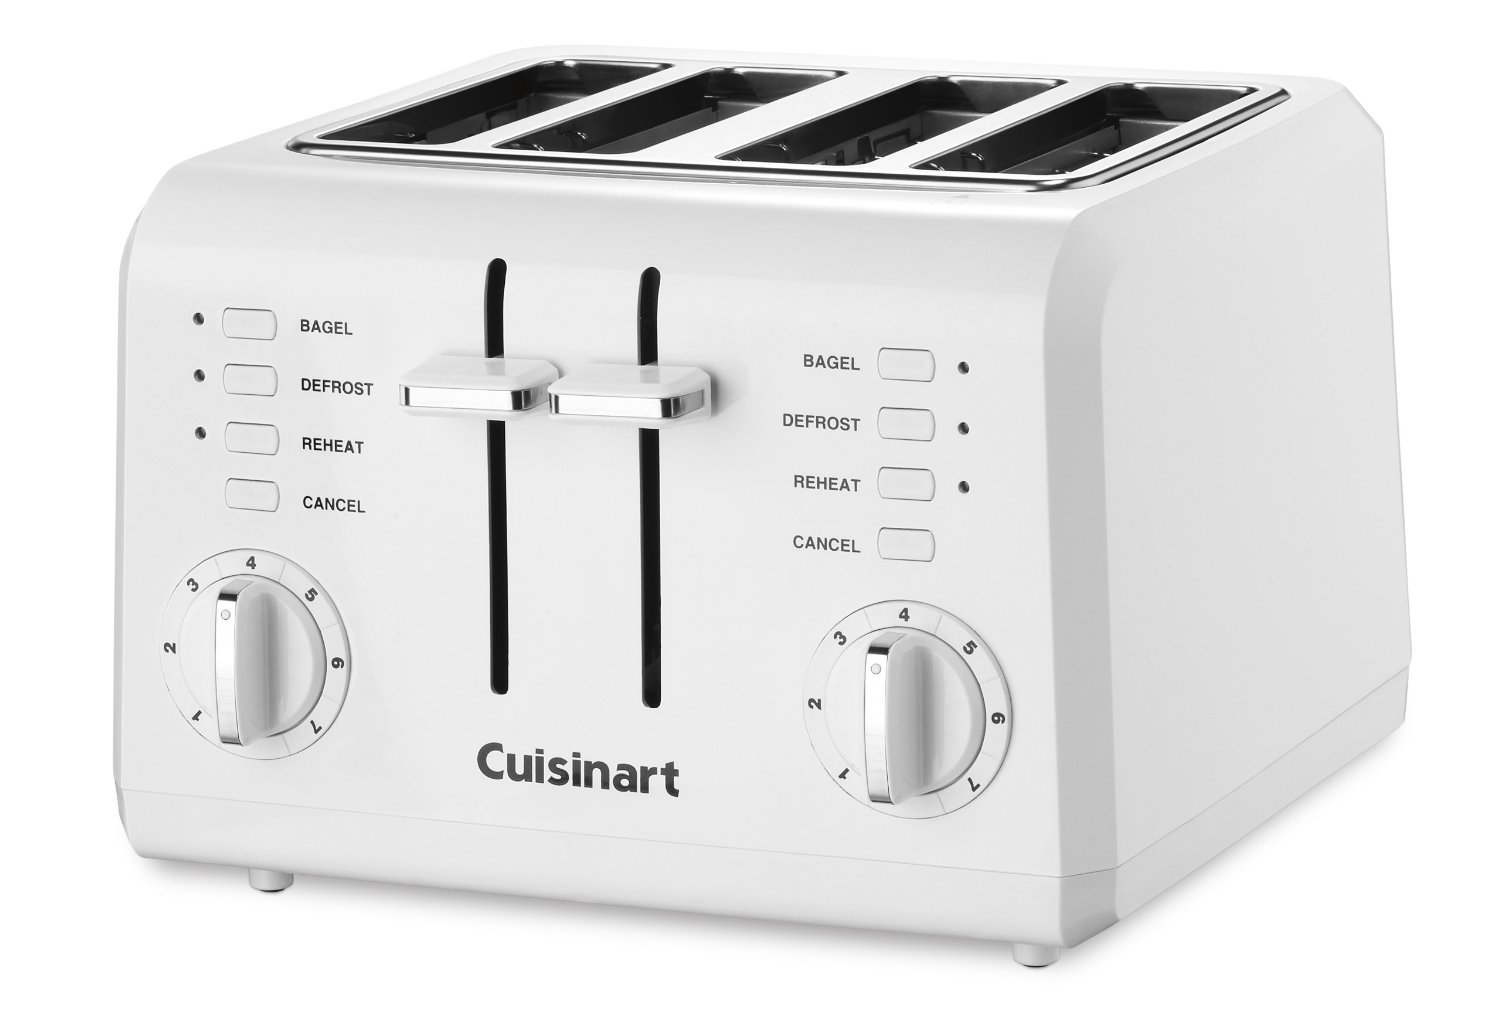 https://9to5toys.com/wp-content/uploads/sites/5/2015/10/cuisinart-compact-4-slice-wide-slot-toaster-cpt-142-sale-01.jpg